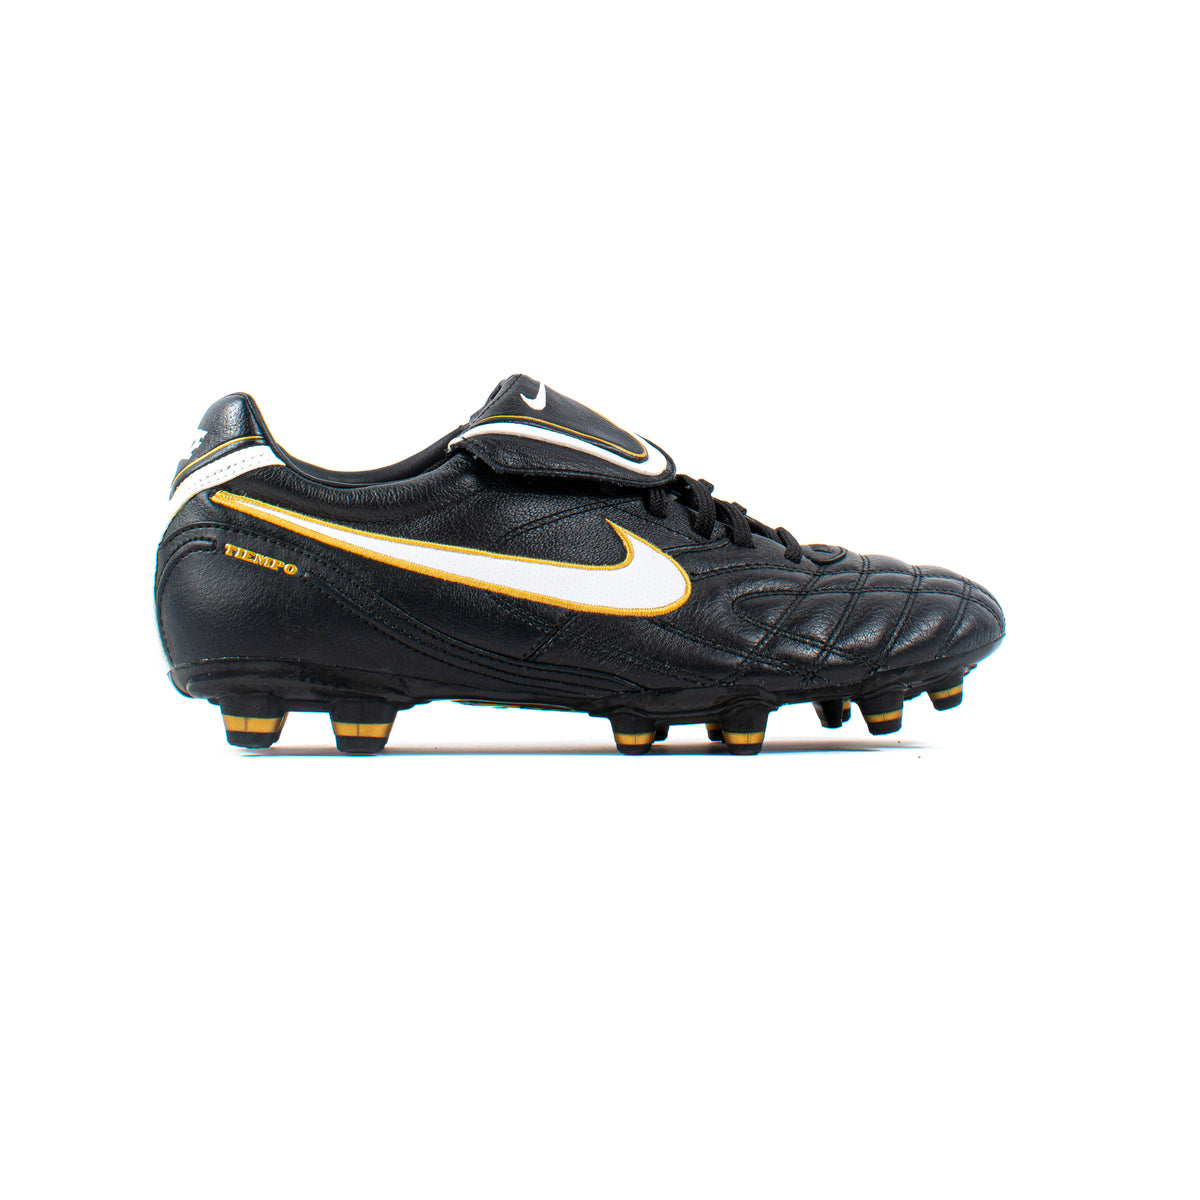 Knikken Vluchtig Anesthesie Nike Tiempo Mystic III Black Gold FG – Classic Soccer Cleats